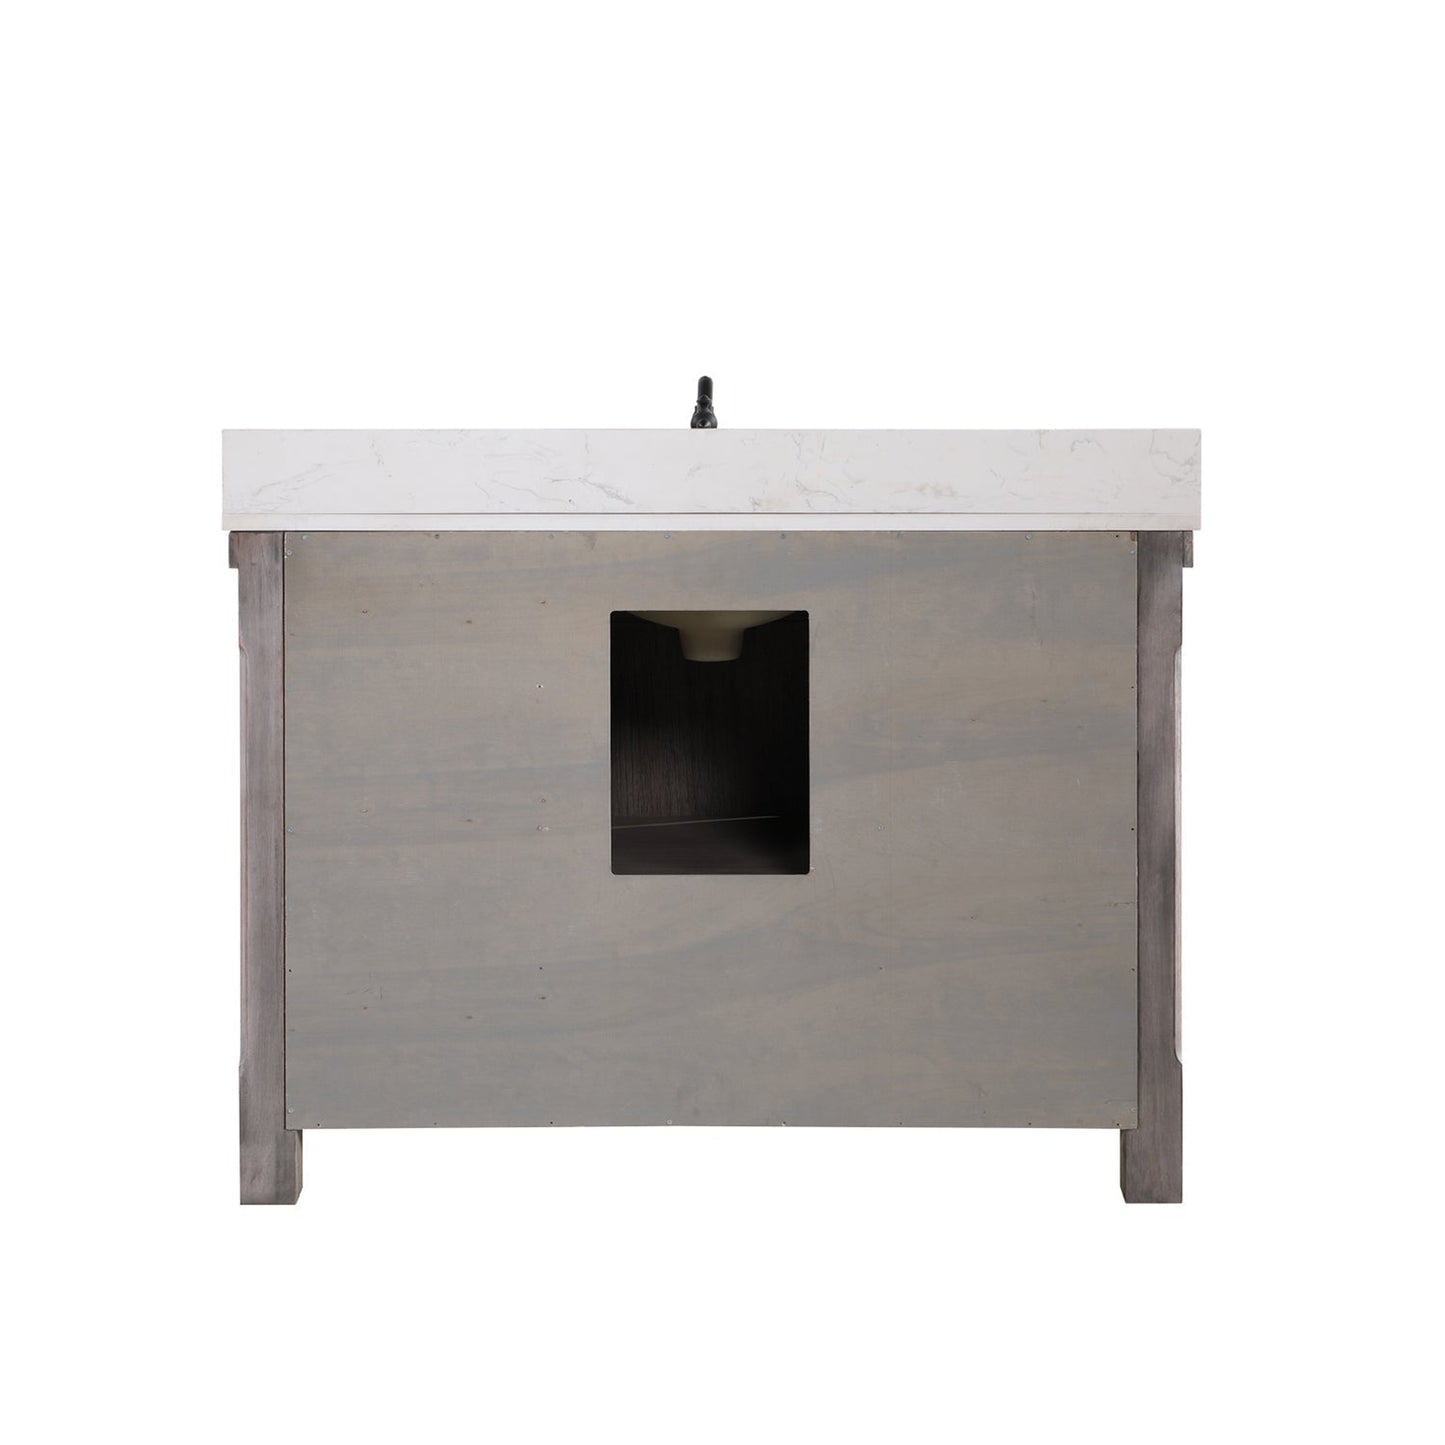 Vinnova Cortes 48" Single Sink Bath Vanity In Classical Grey Finish With White Composite Countertop And Mirror